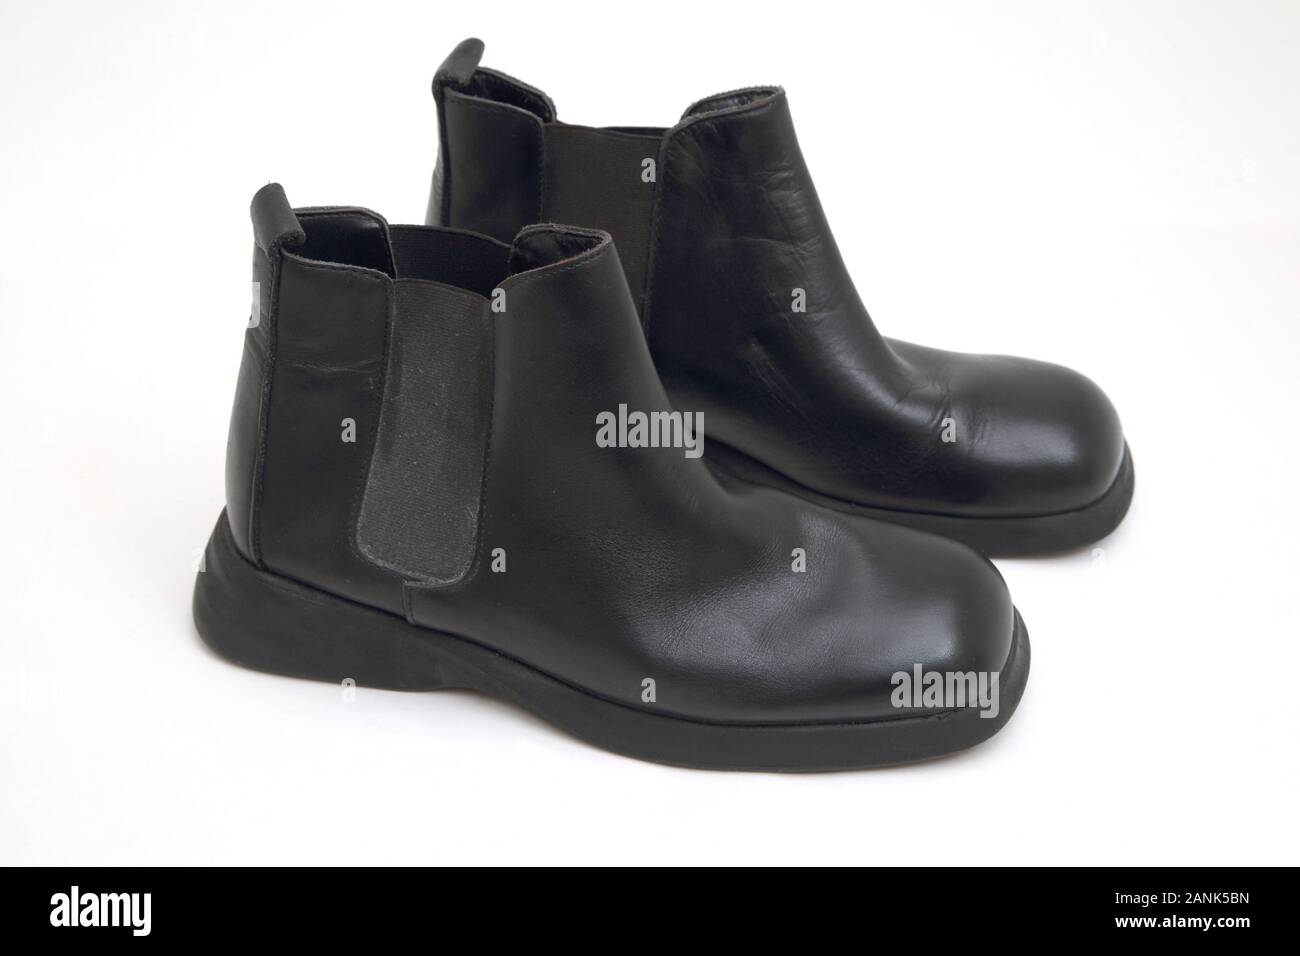 A Pair of Black Leather Chelsea Boots Stock Photo